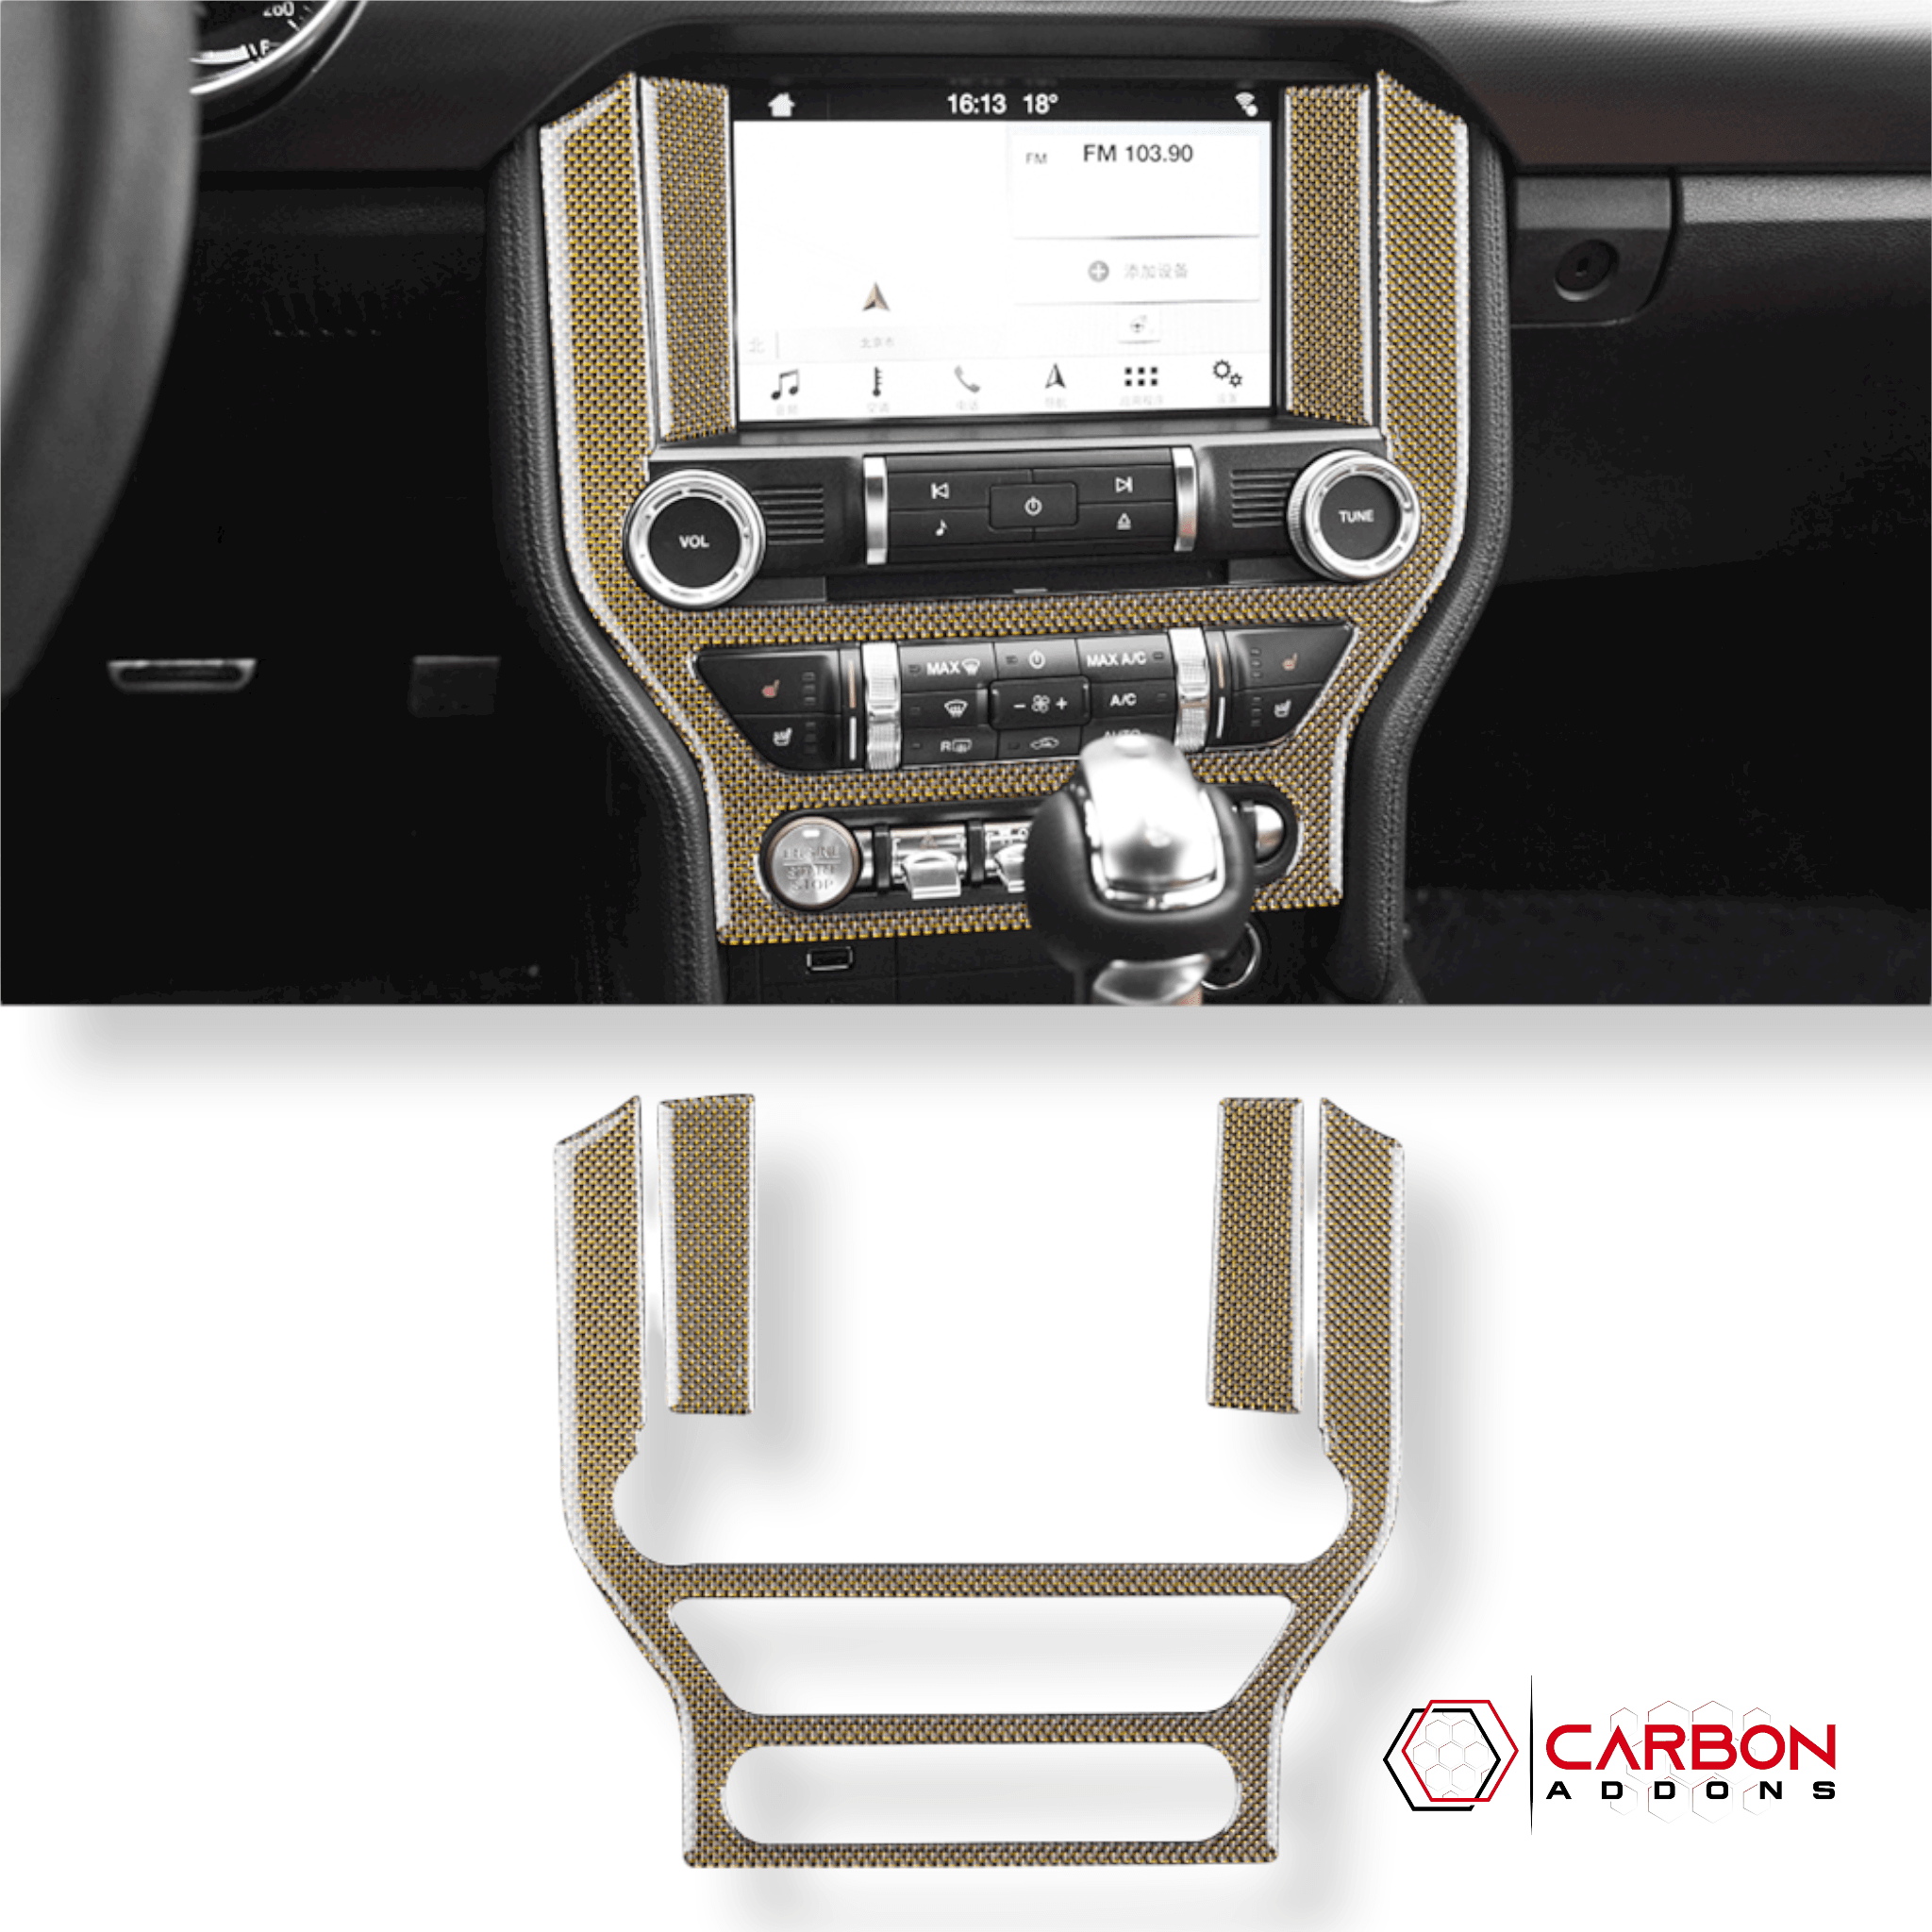 Reflective Carbon Fiber Multimedia Radio Trim Overlay for Ford Mustang 2015-2023 - carbonaddons Carbon Fiber Parts, Accessories, Upgrades, Mods